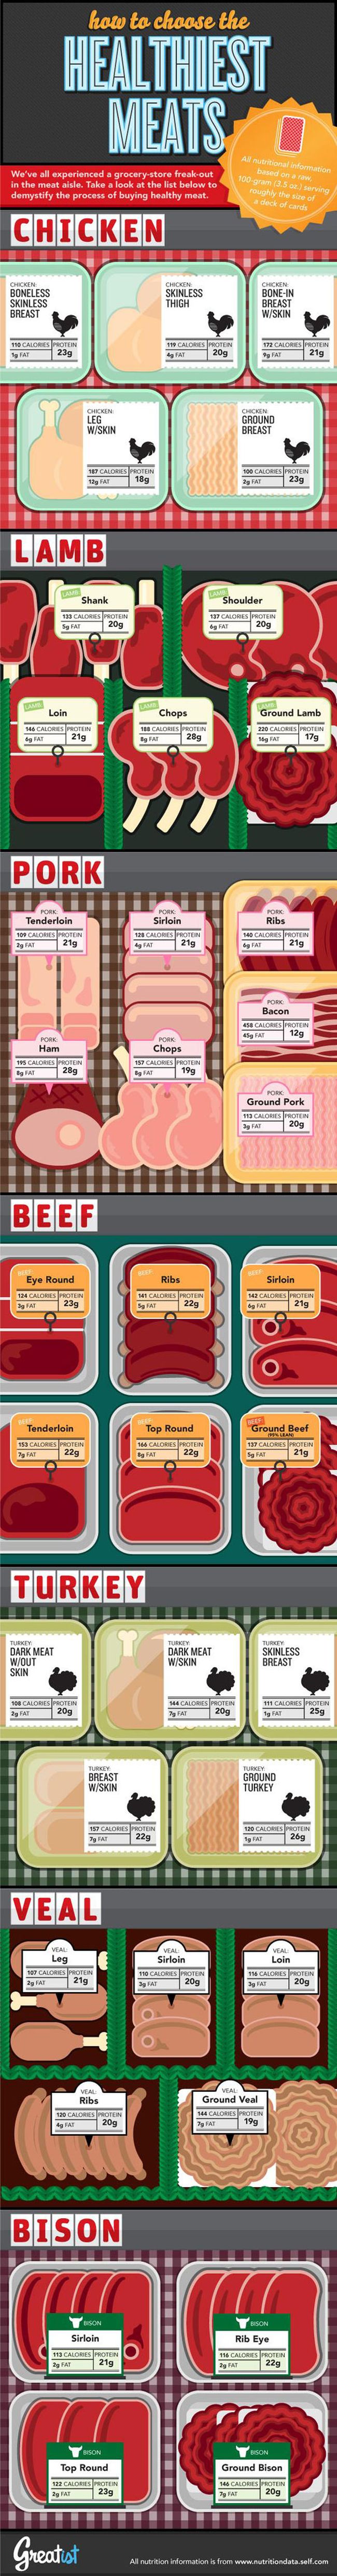 Learn Which Meats Are The Healthiest For You (infographic)